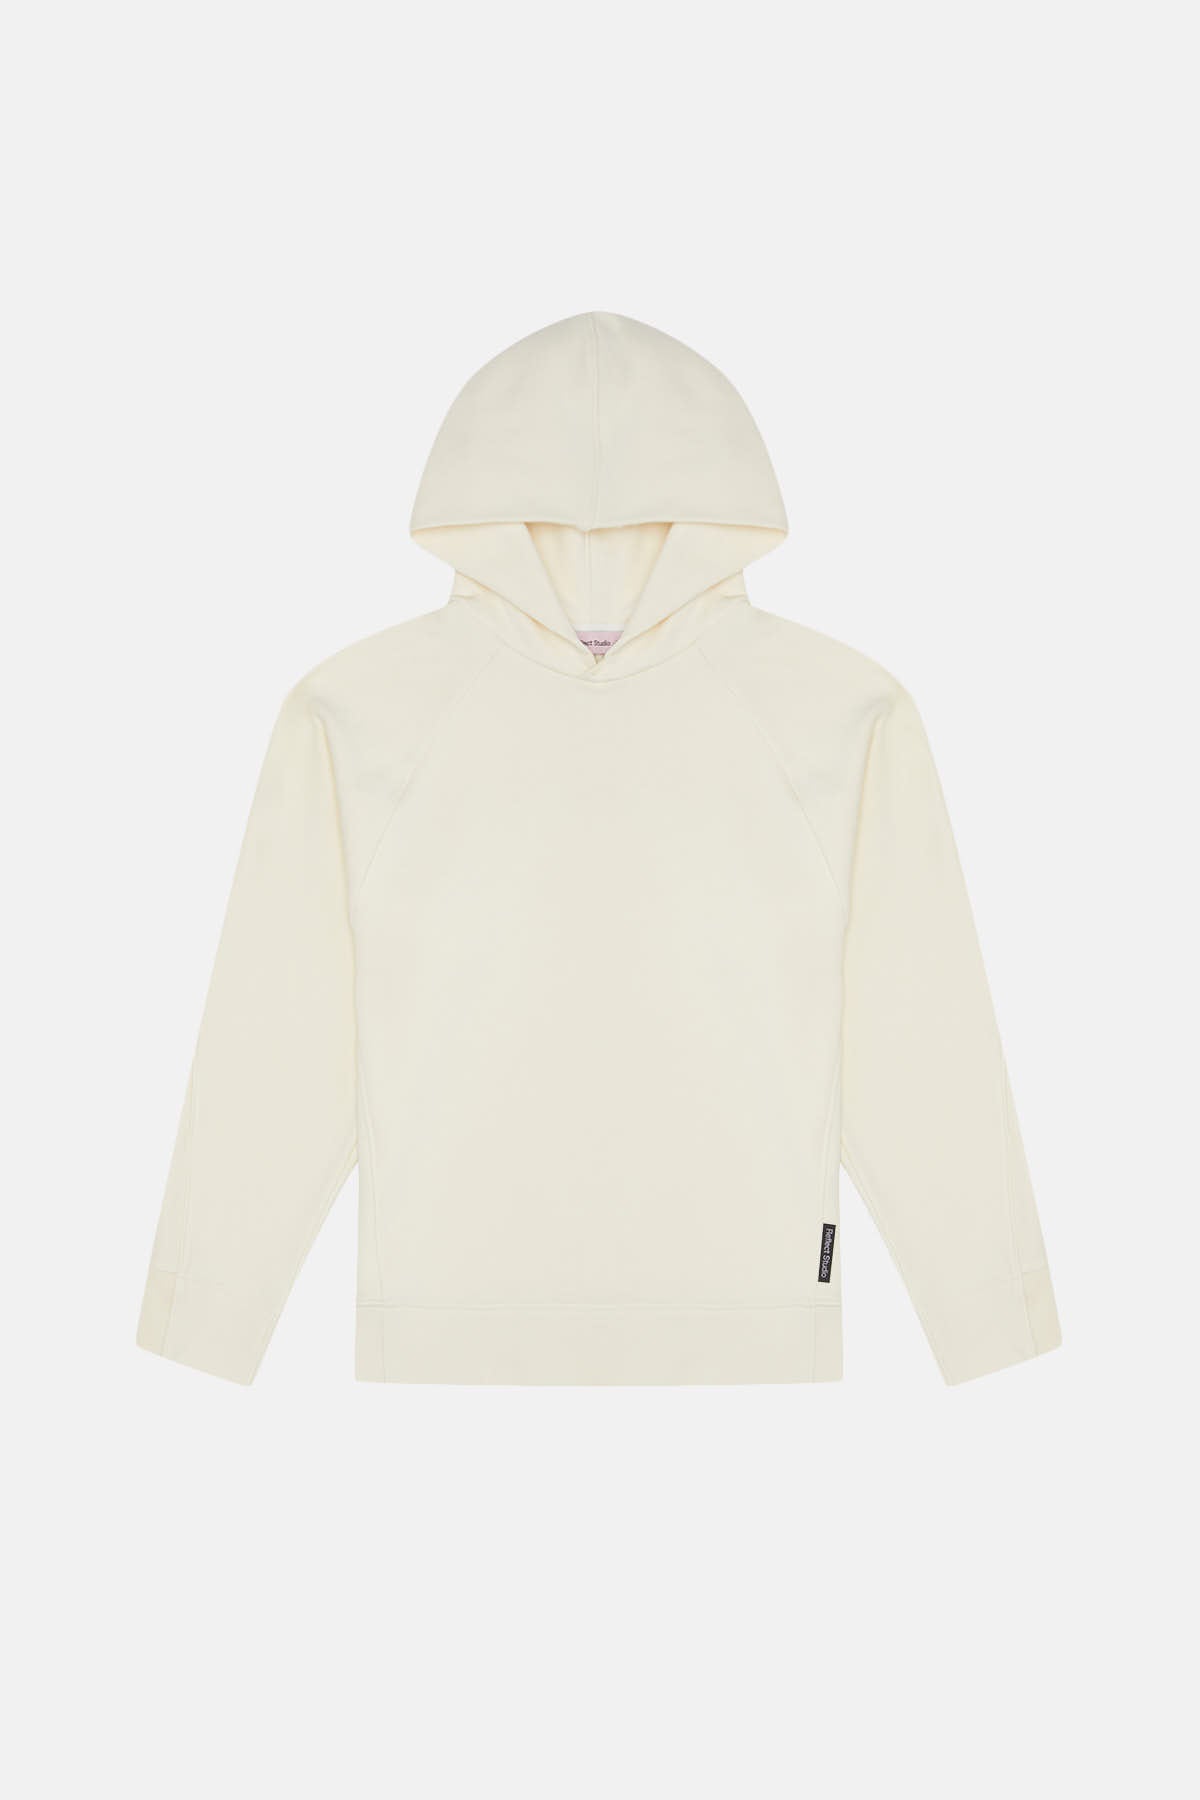 Logo Tag Relaxed Fit Hoodie - Bone White